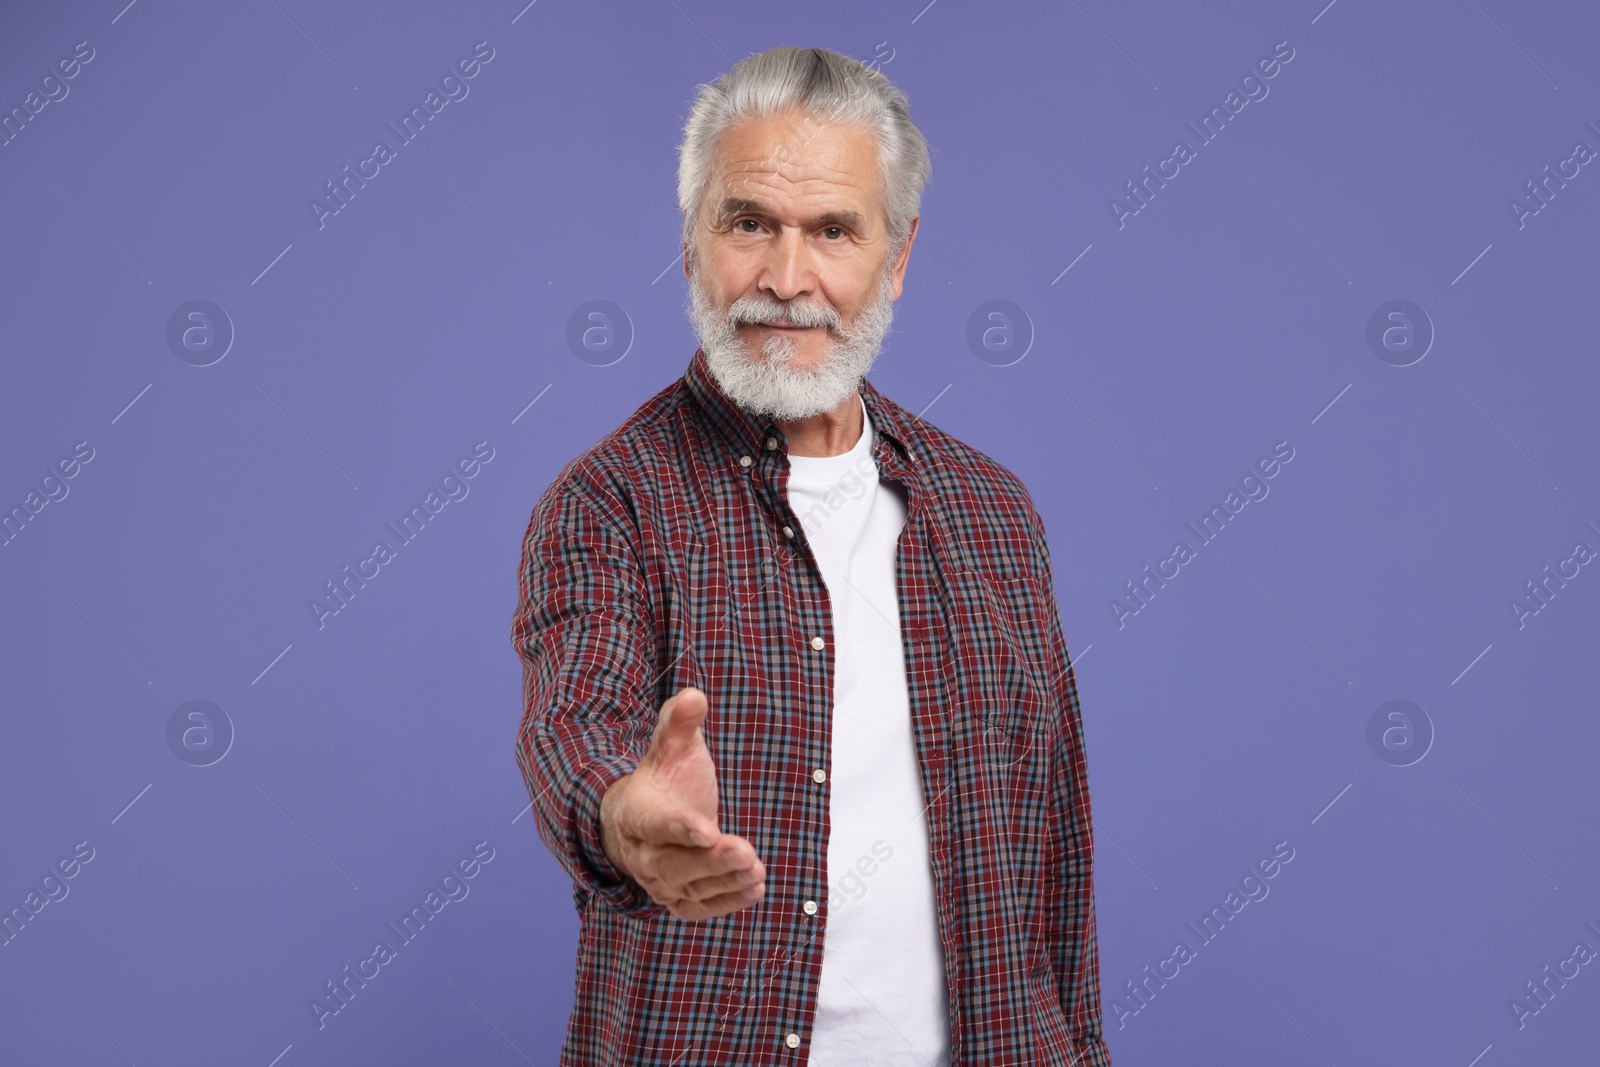 Photo of Senior man welcoming and offering handshake on purple background